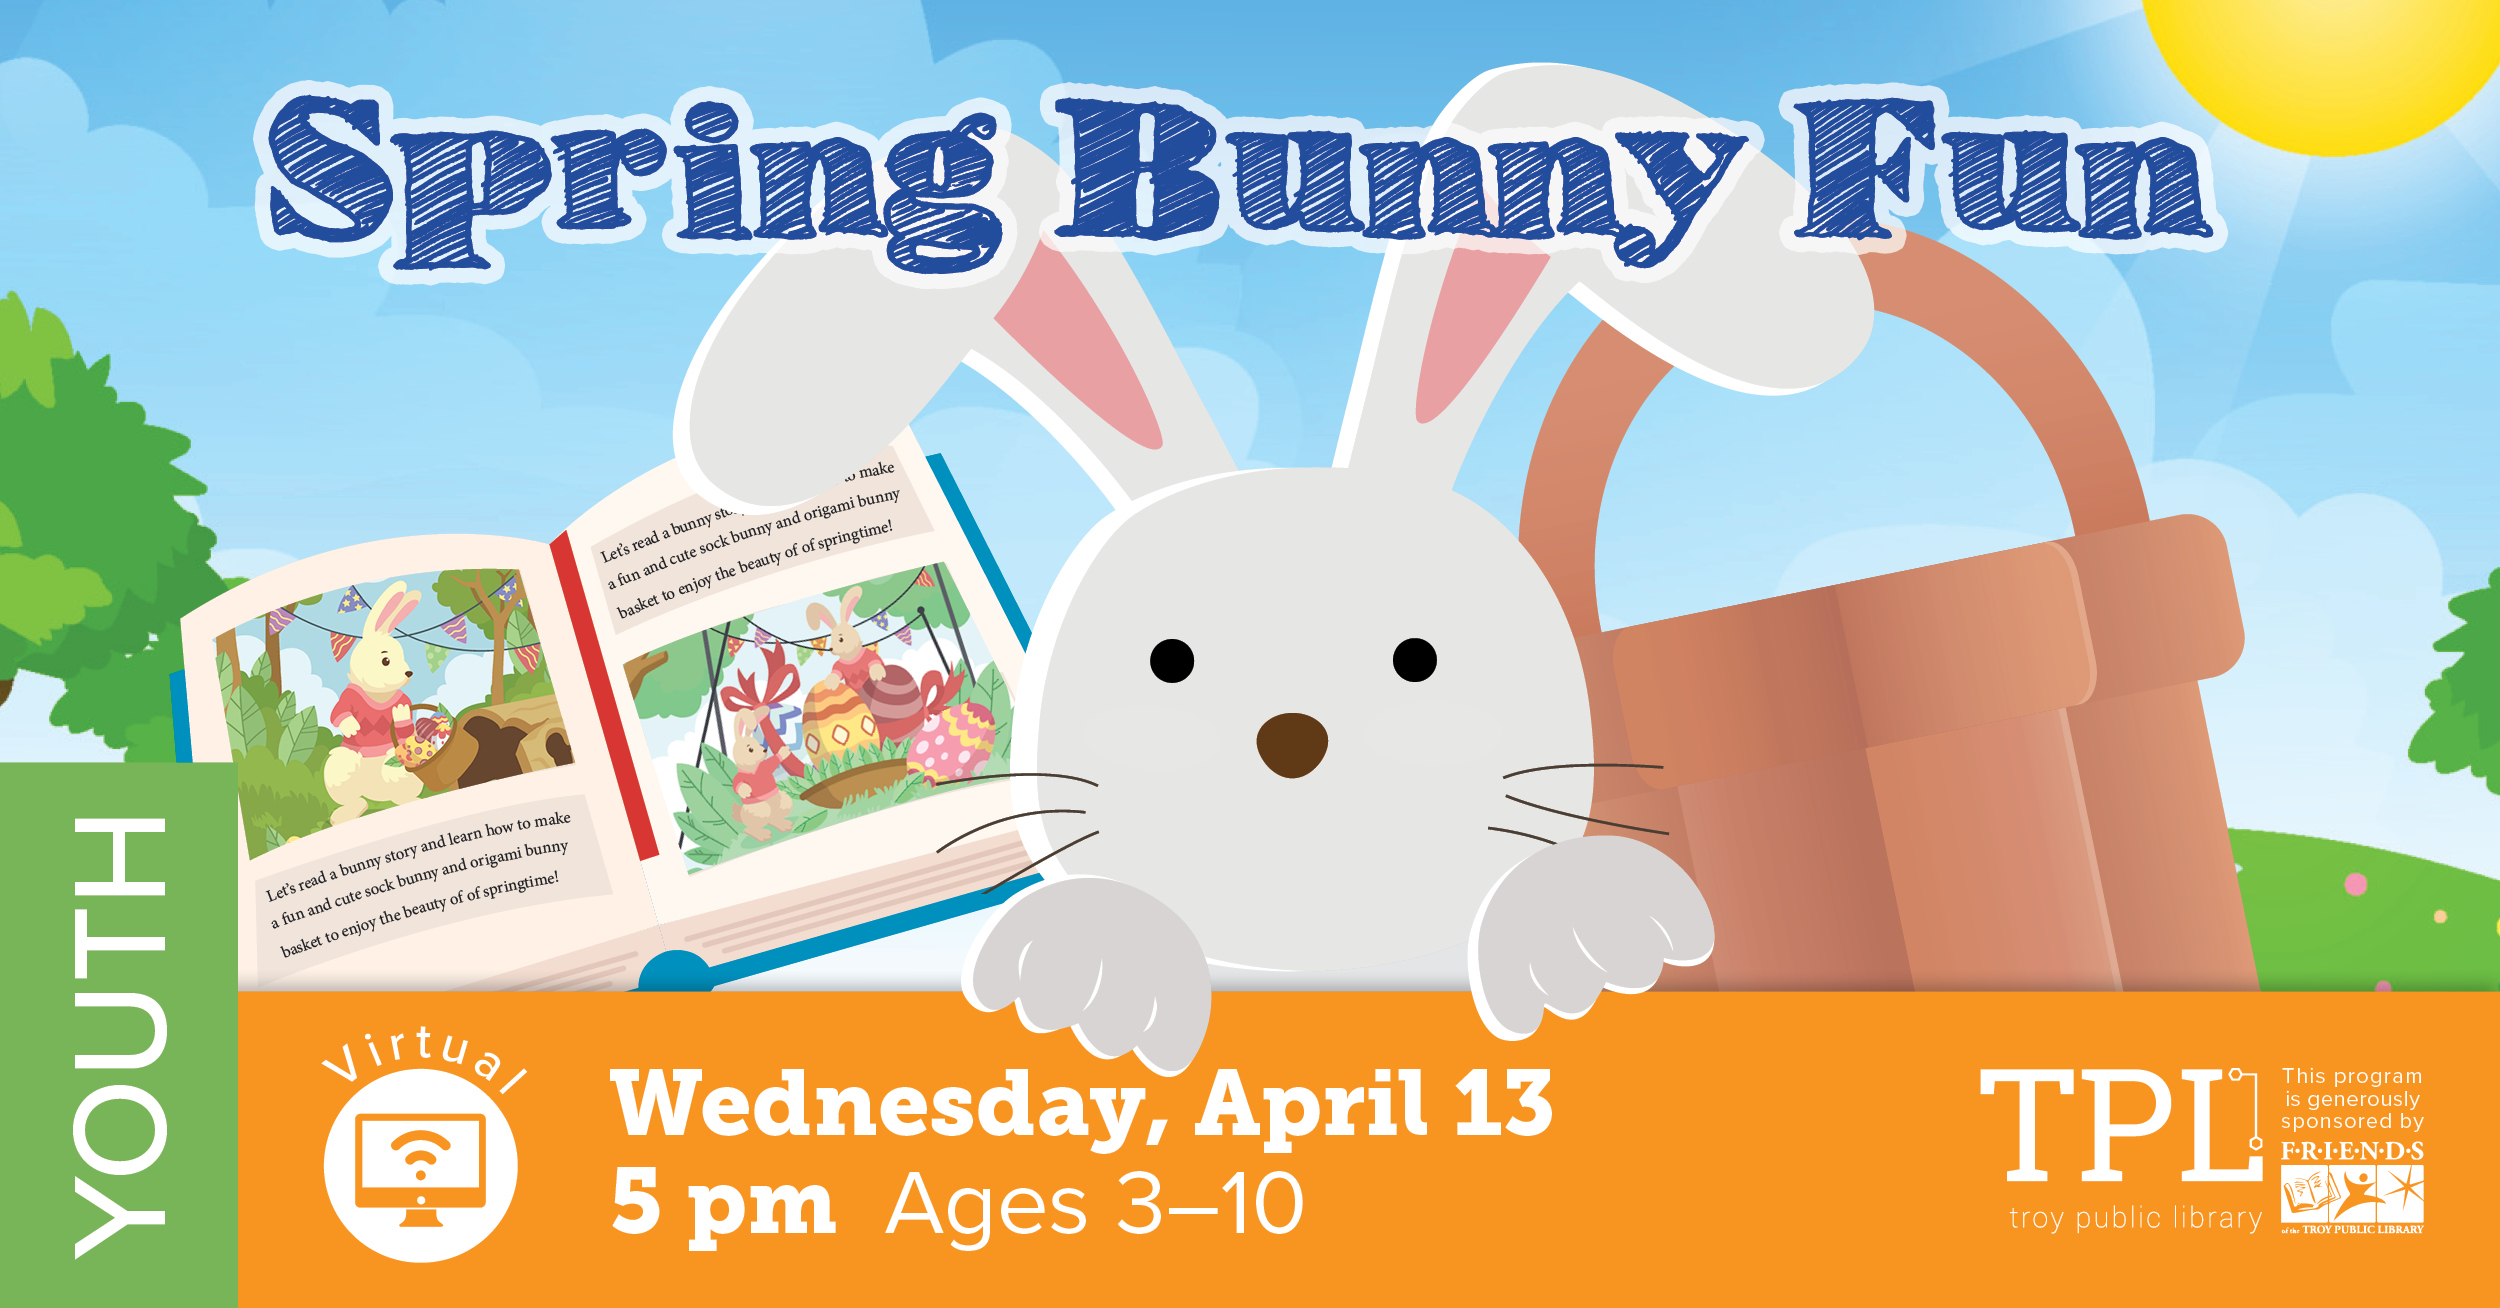 Spring Bunny Fun. Virtual Program on Wednesday, April 13th at 5 pm for ages 3 to 10. Sponsored by the Friends of the Troy Public Library.